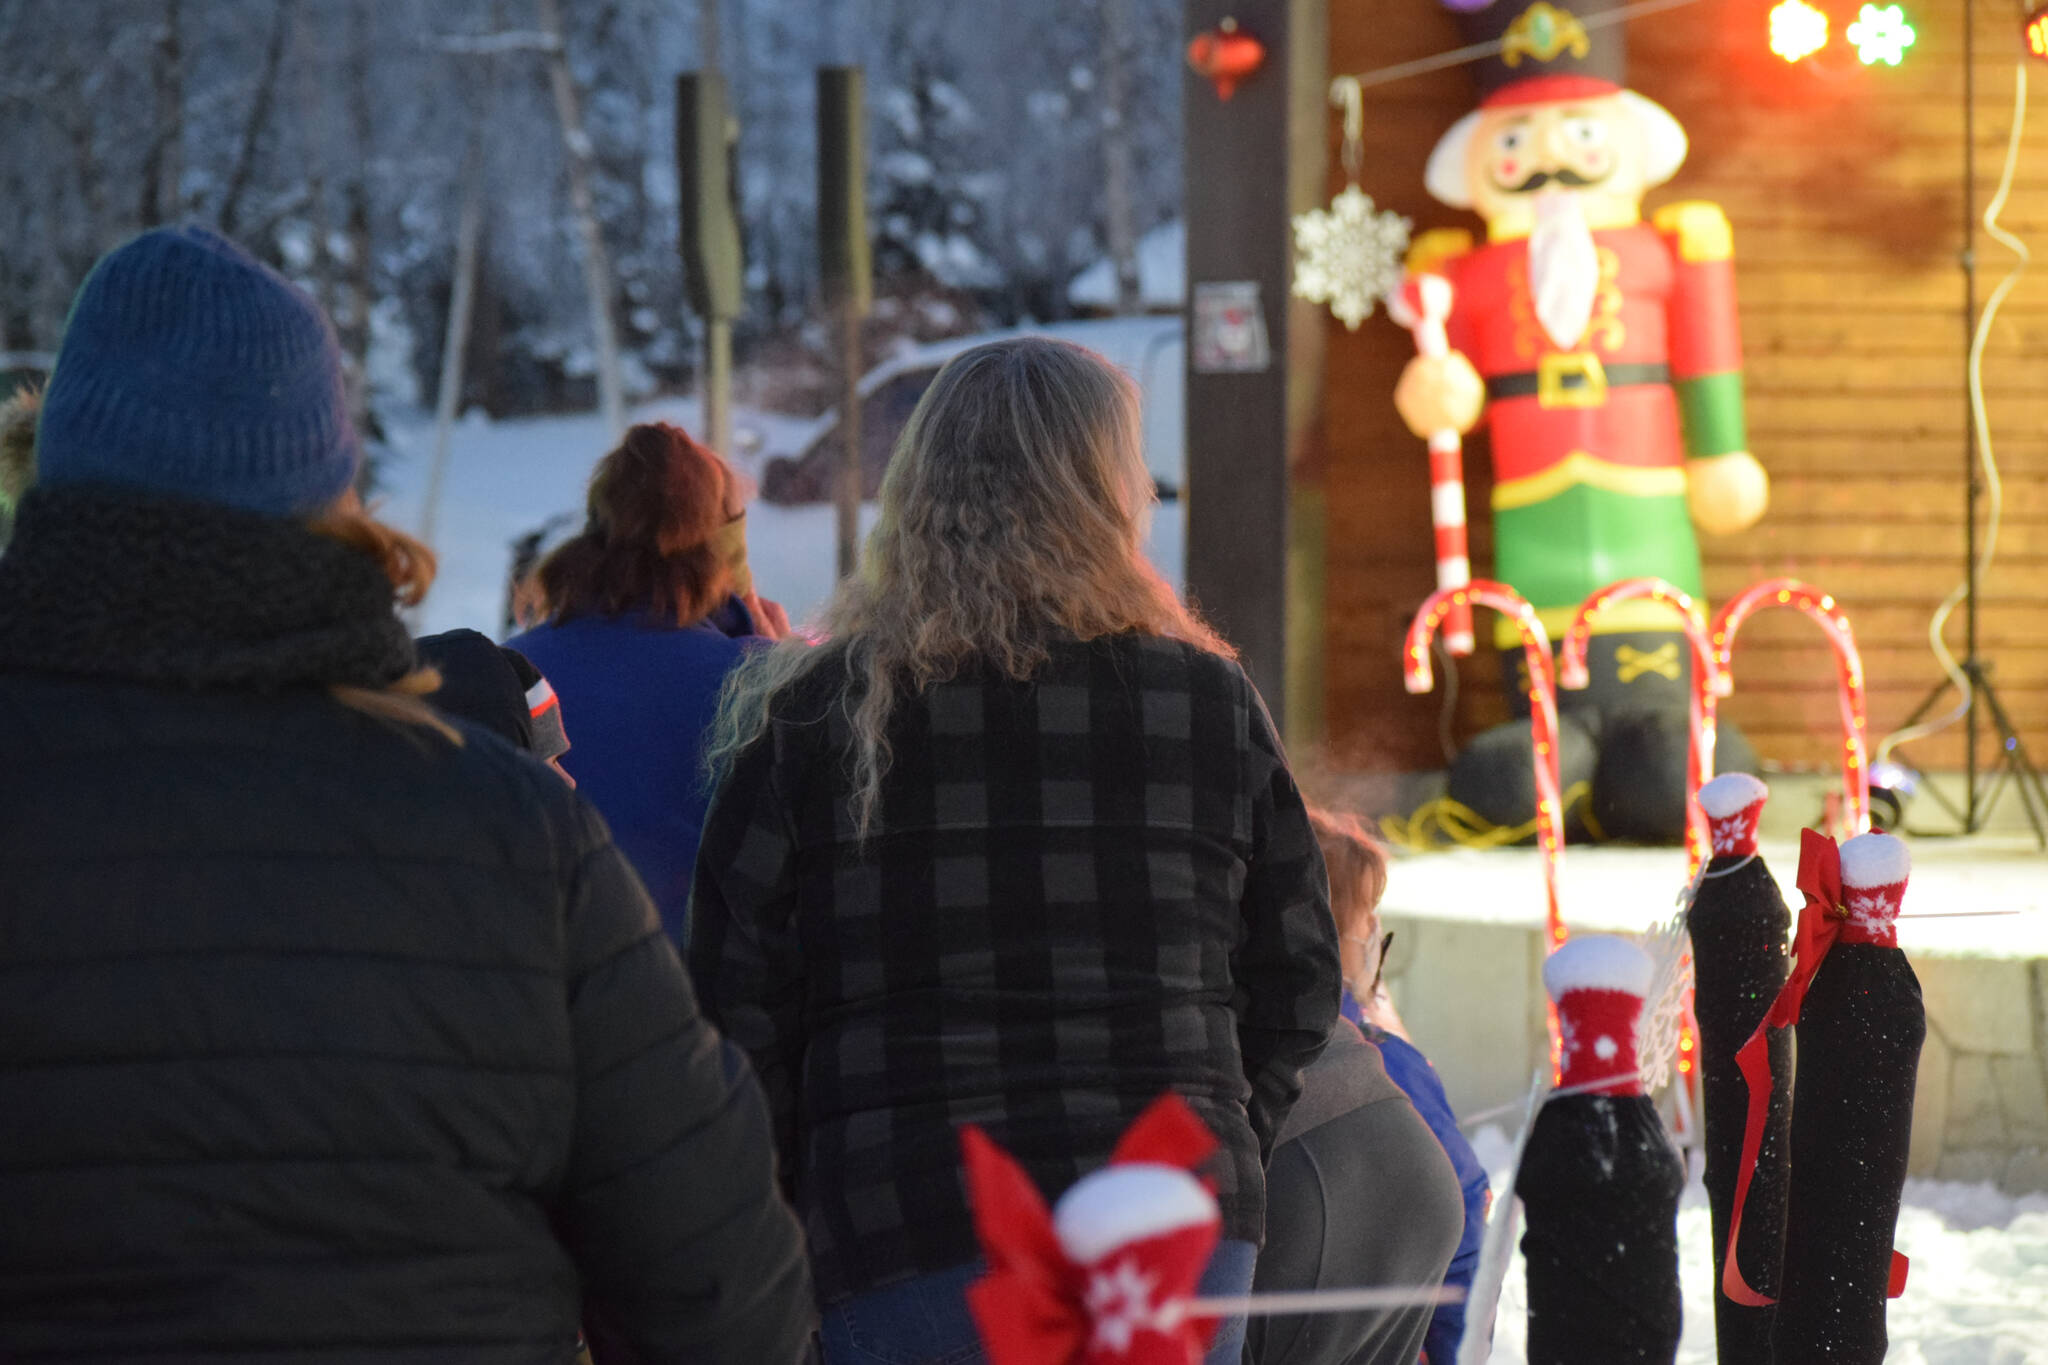 People wait in line to take photos with Santa at Soldotna Creek Park on Saturday, Dec. 4, 2021. (Camille Botello/Peninsula Clarion)